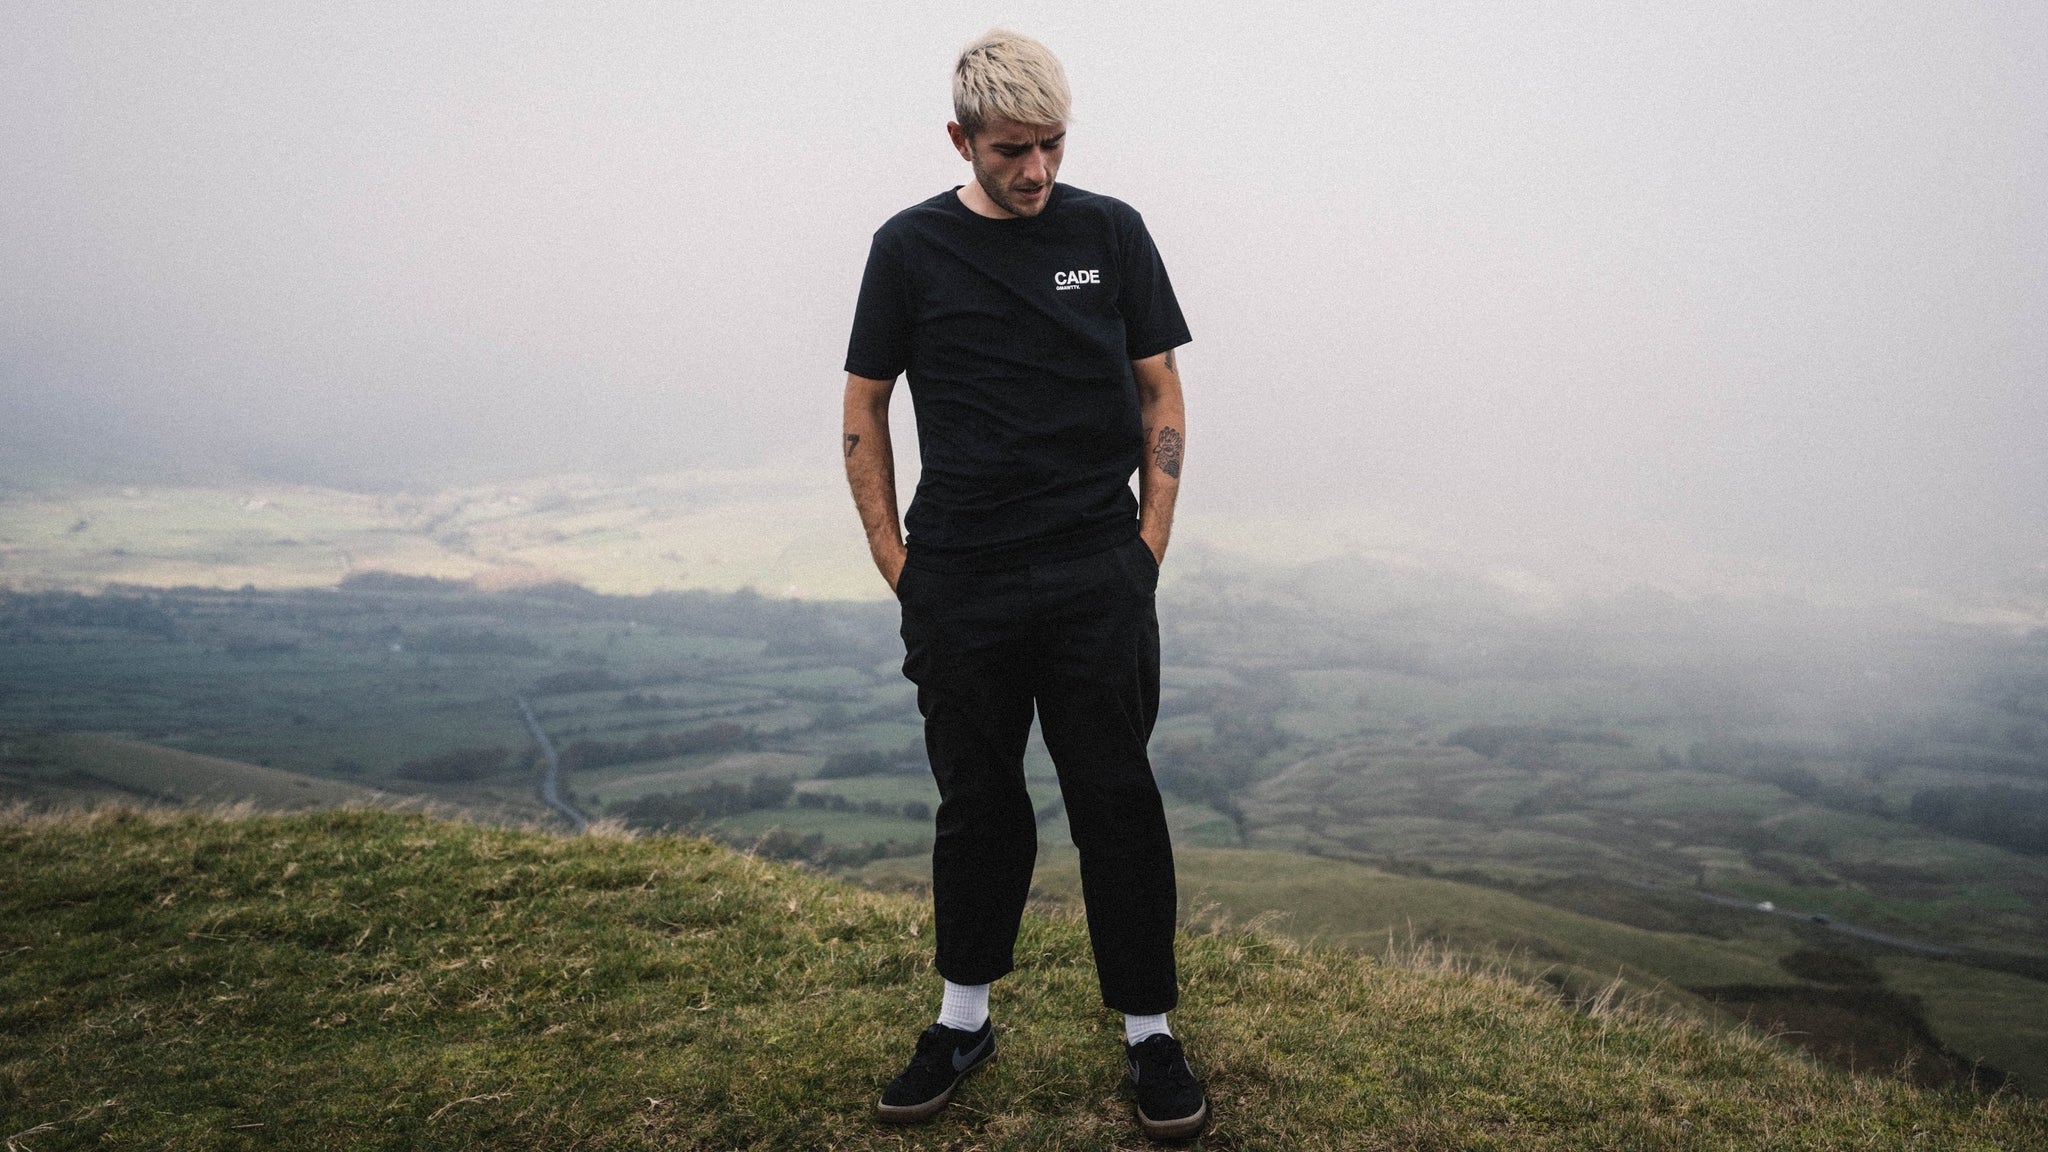 Francis Cade stood on a hill in the PEAK district looking into the distance wearing the new CADE t-shirt